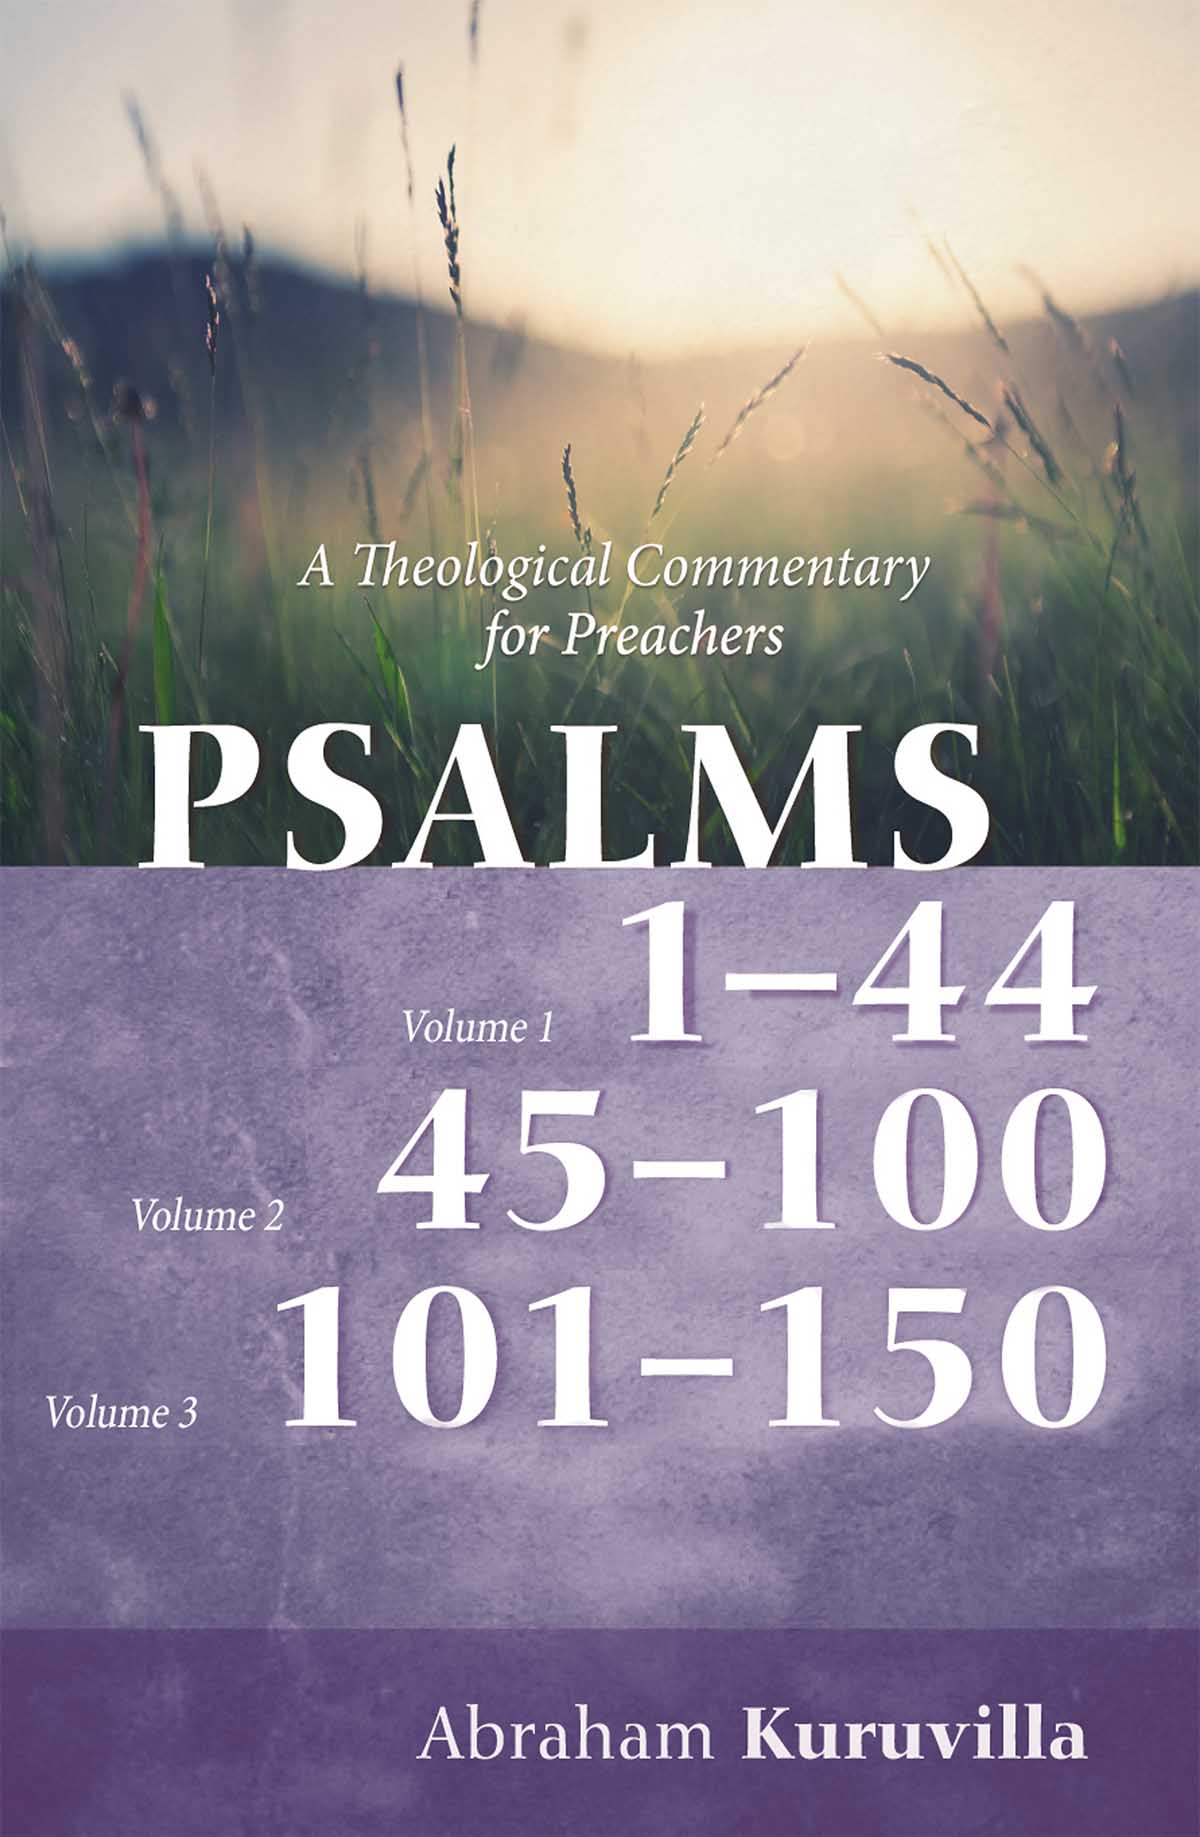 Psalms: A Theological Commentary for Preachers